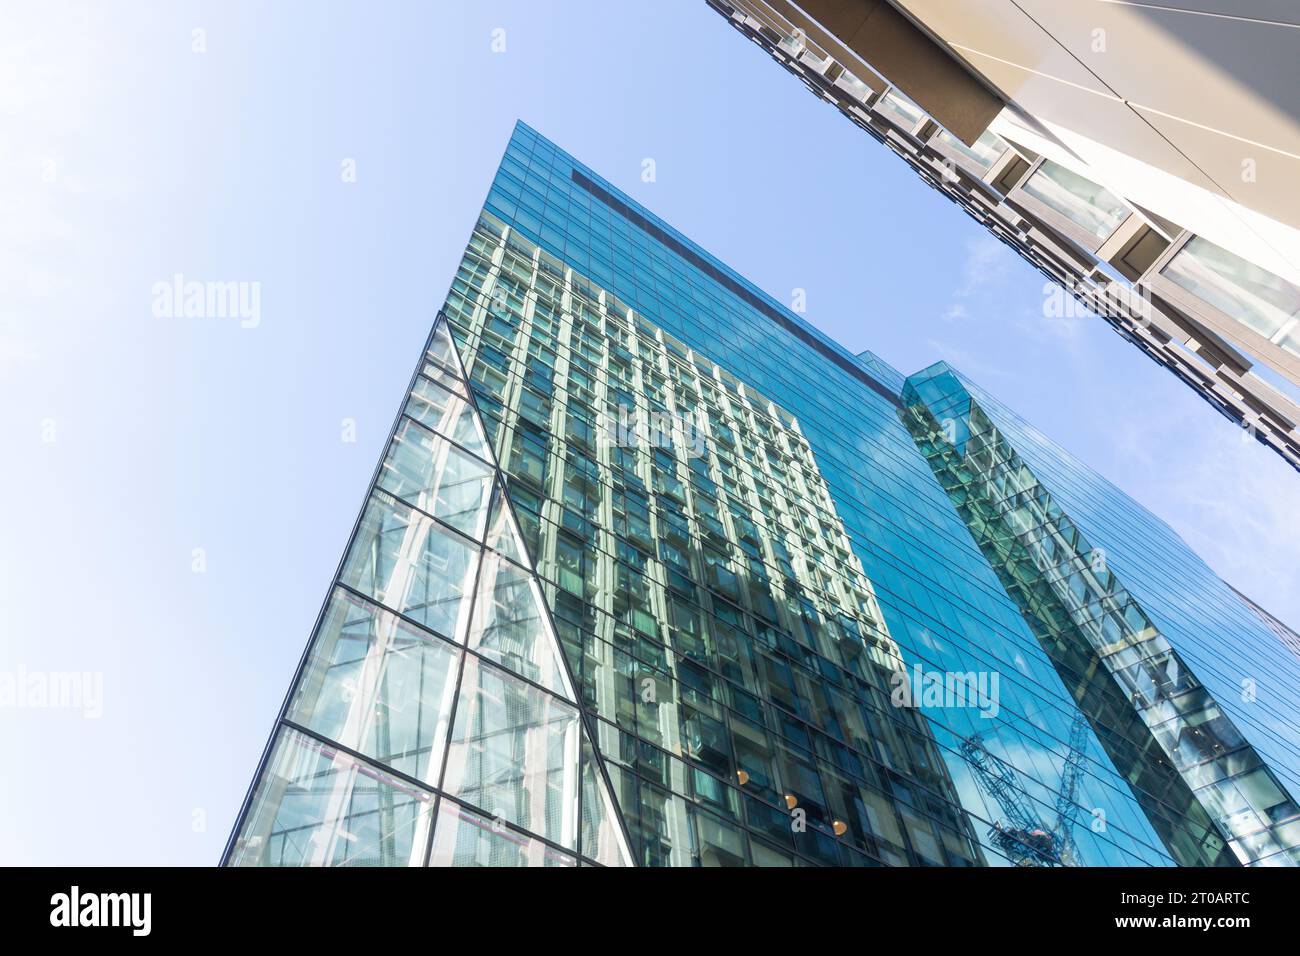 High-rise building reflection, Cassion Square, Waterloo, London Borough of Lambeth, Greater London, England, United Kingdom Stock Photo